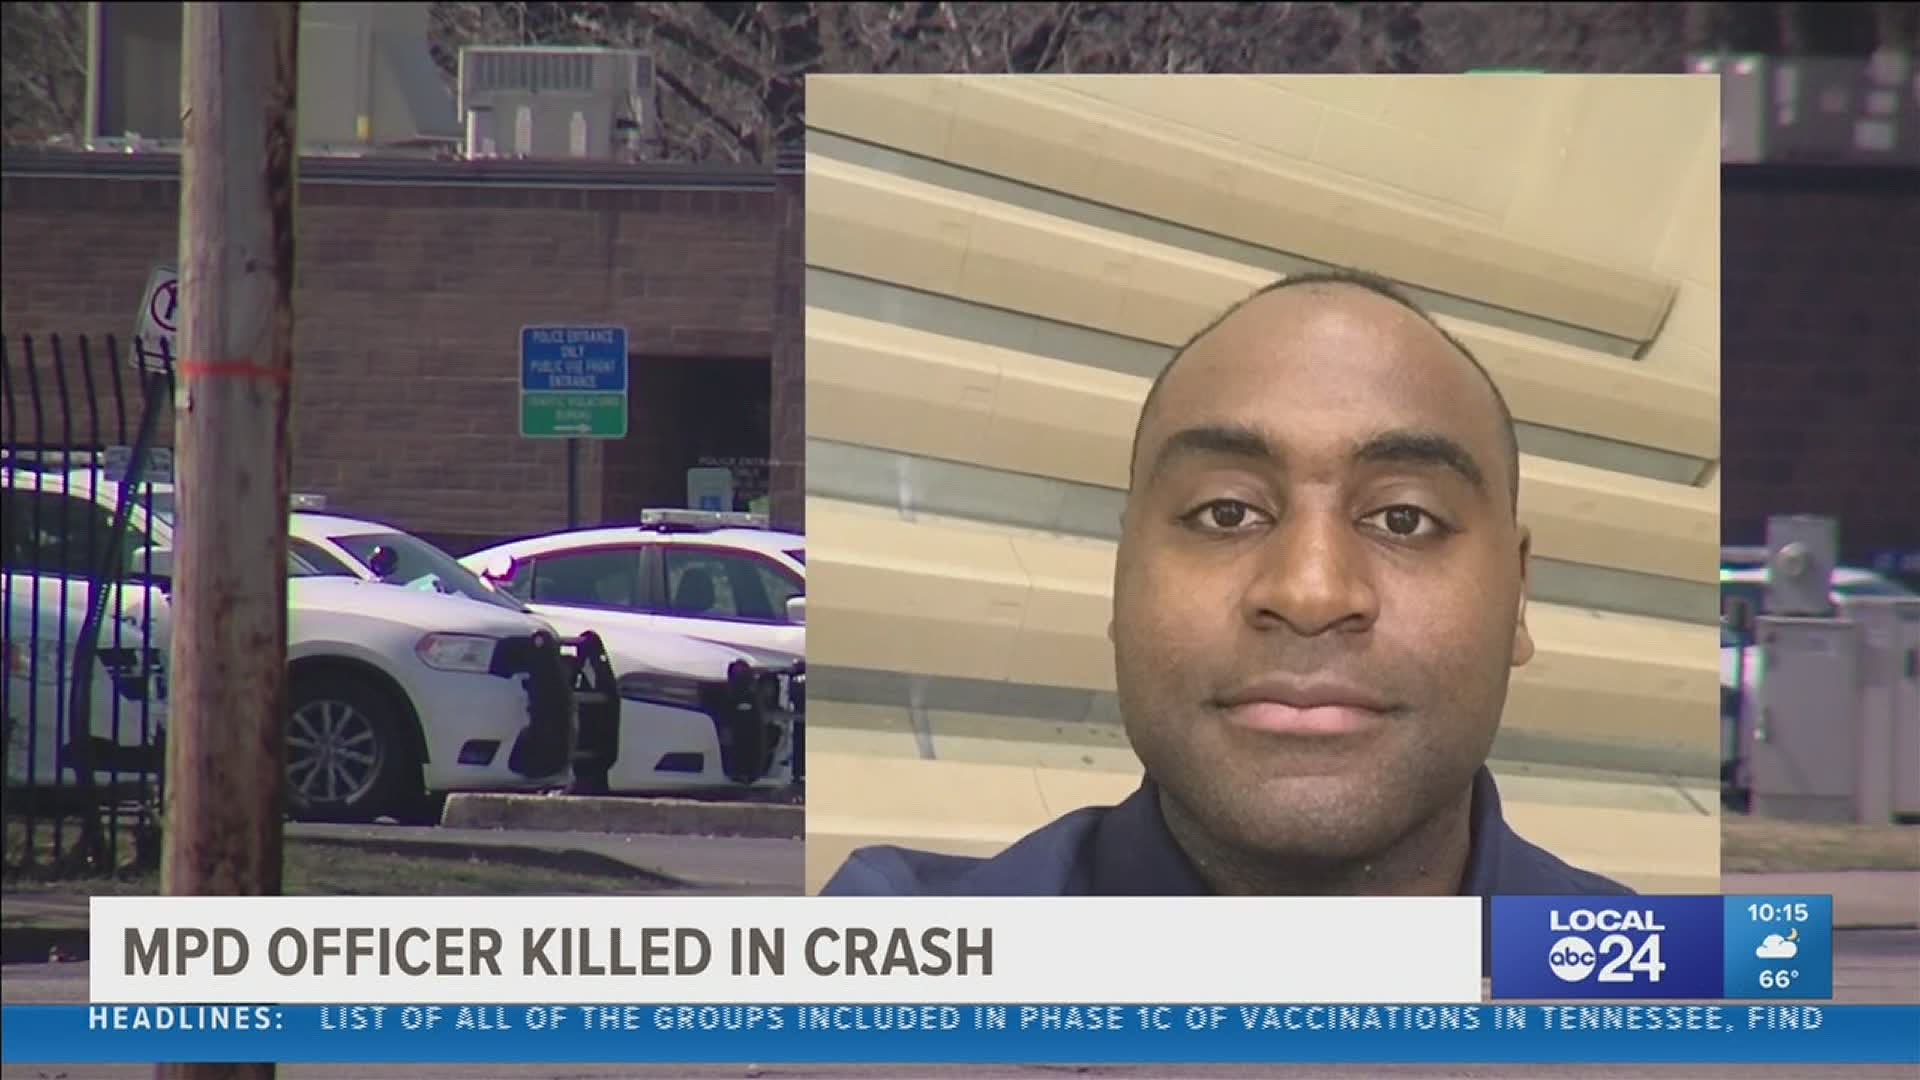 Officer Blow was leaving work in Whitehaven when another car hit him on the driver’s side.